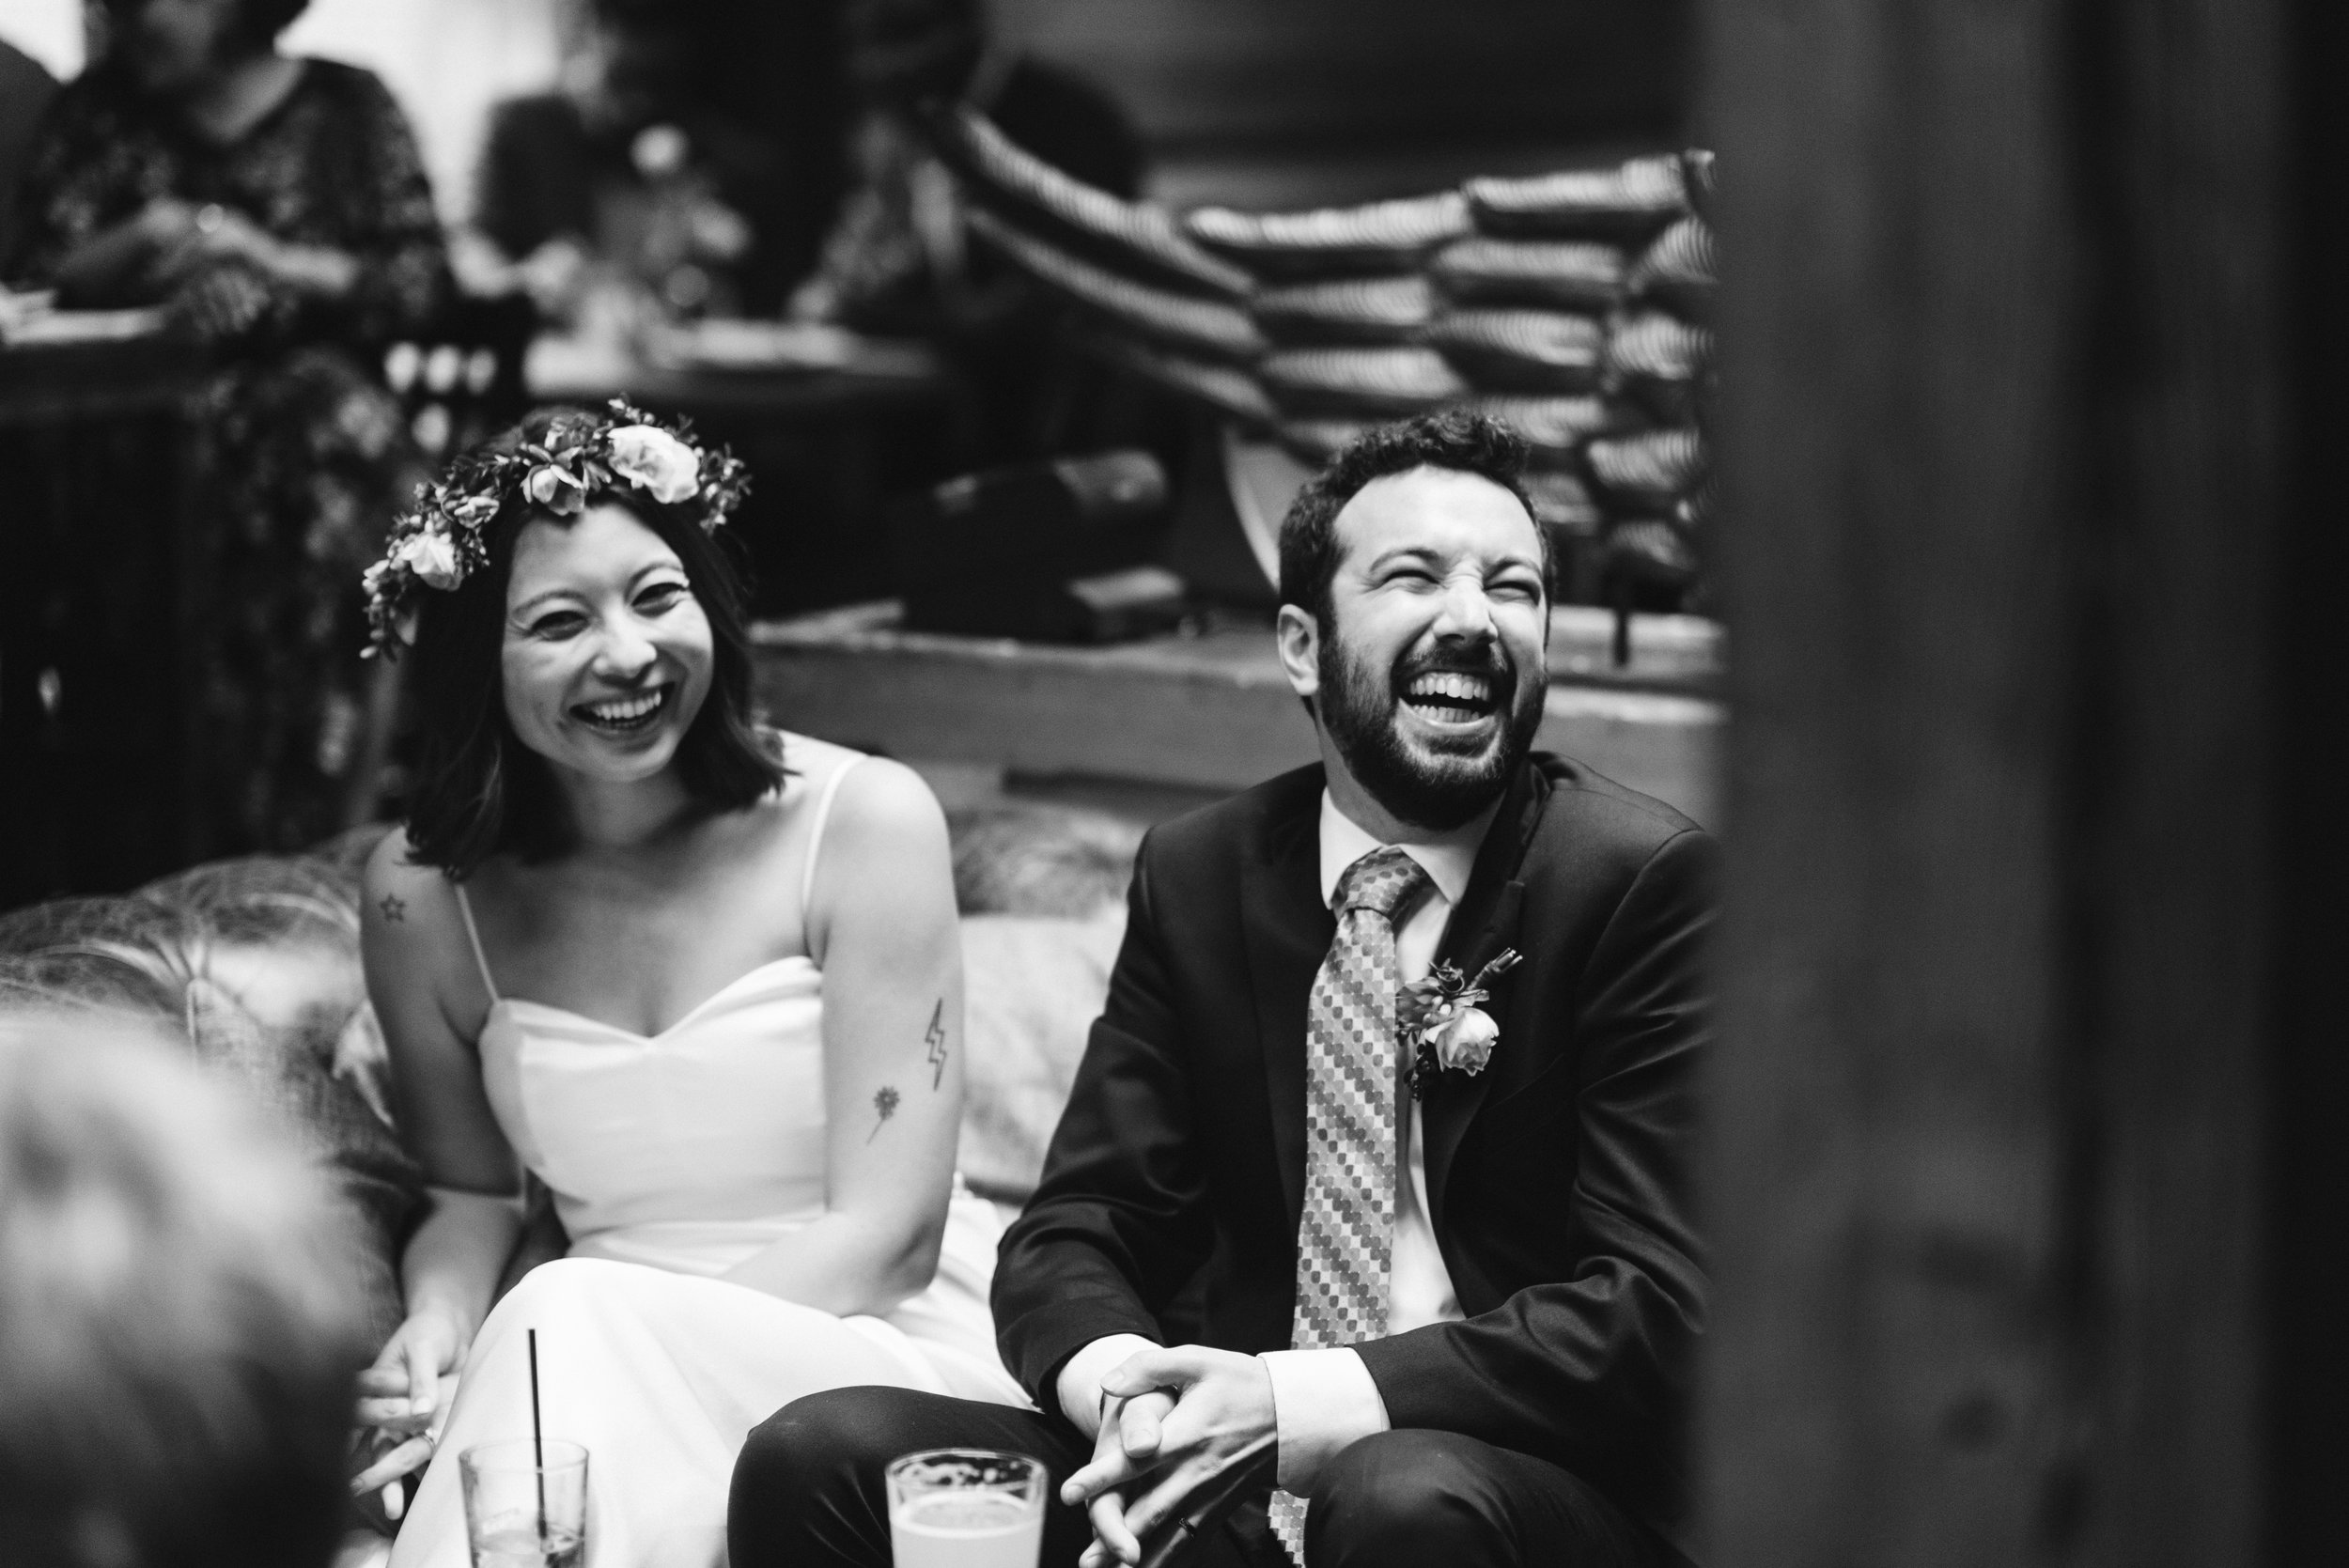  Washington DC, Baltimore Wedding Photographer, Alexandria, Old Town, Jewel Tone, Romantic, Modern, Virtue Feed &amp; Grain, Candid Photo of Bride and Groom Laughing During Speech, Black and White 